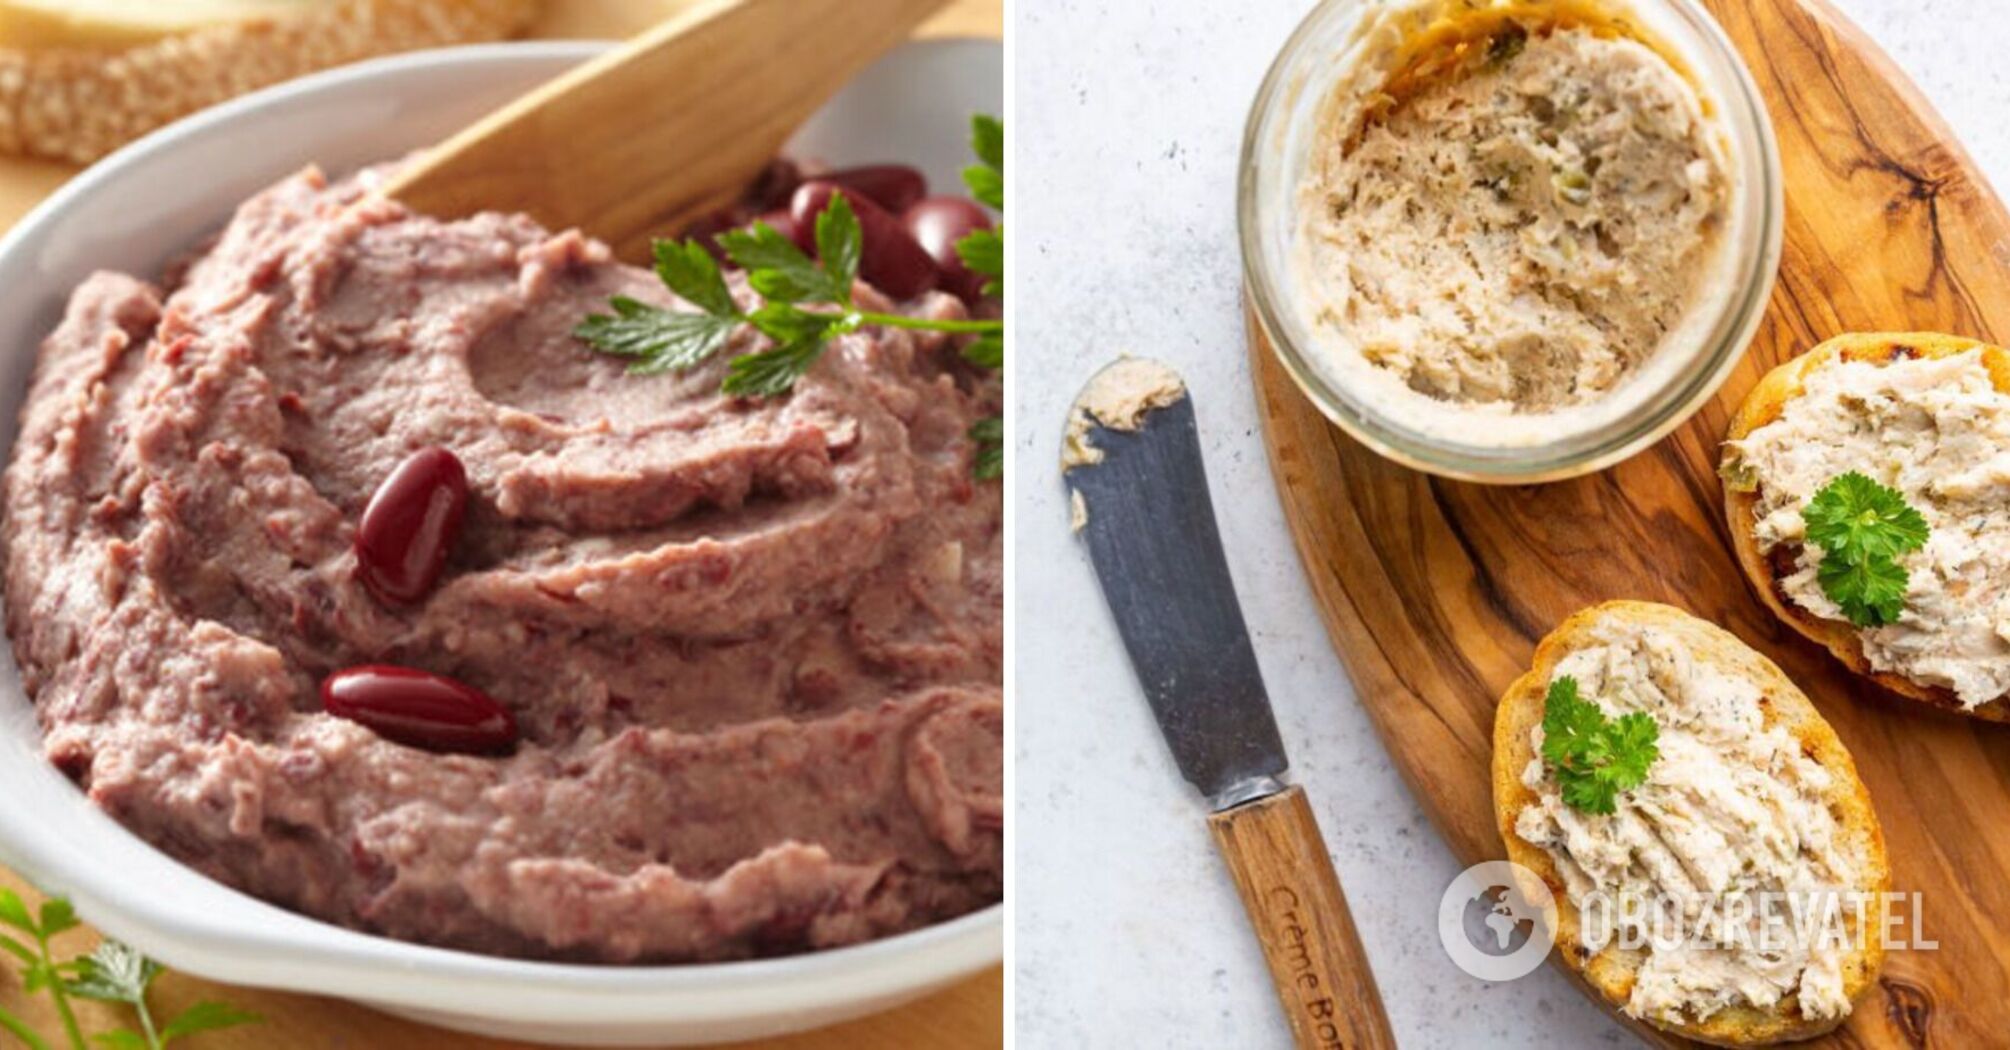 Useful bean and mushroom pate: even better than liver one